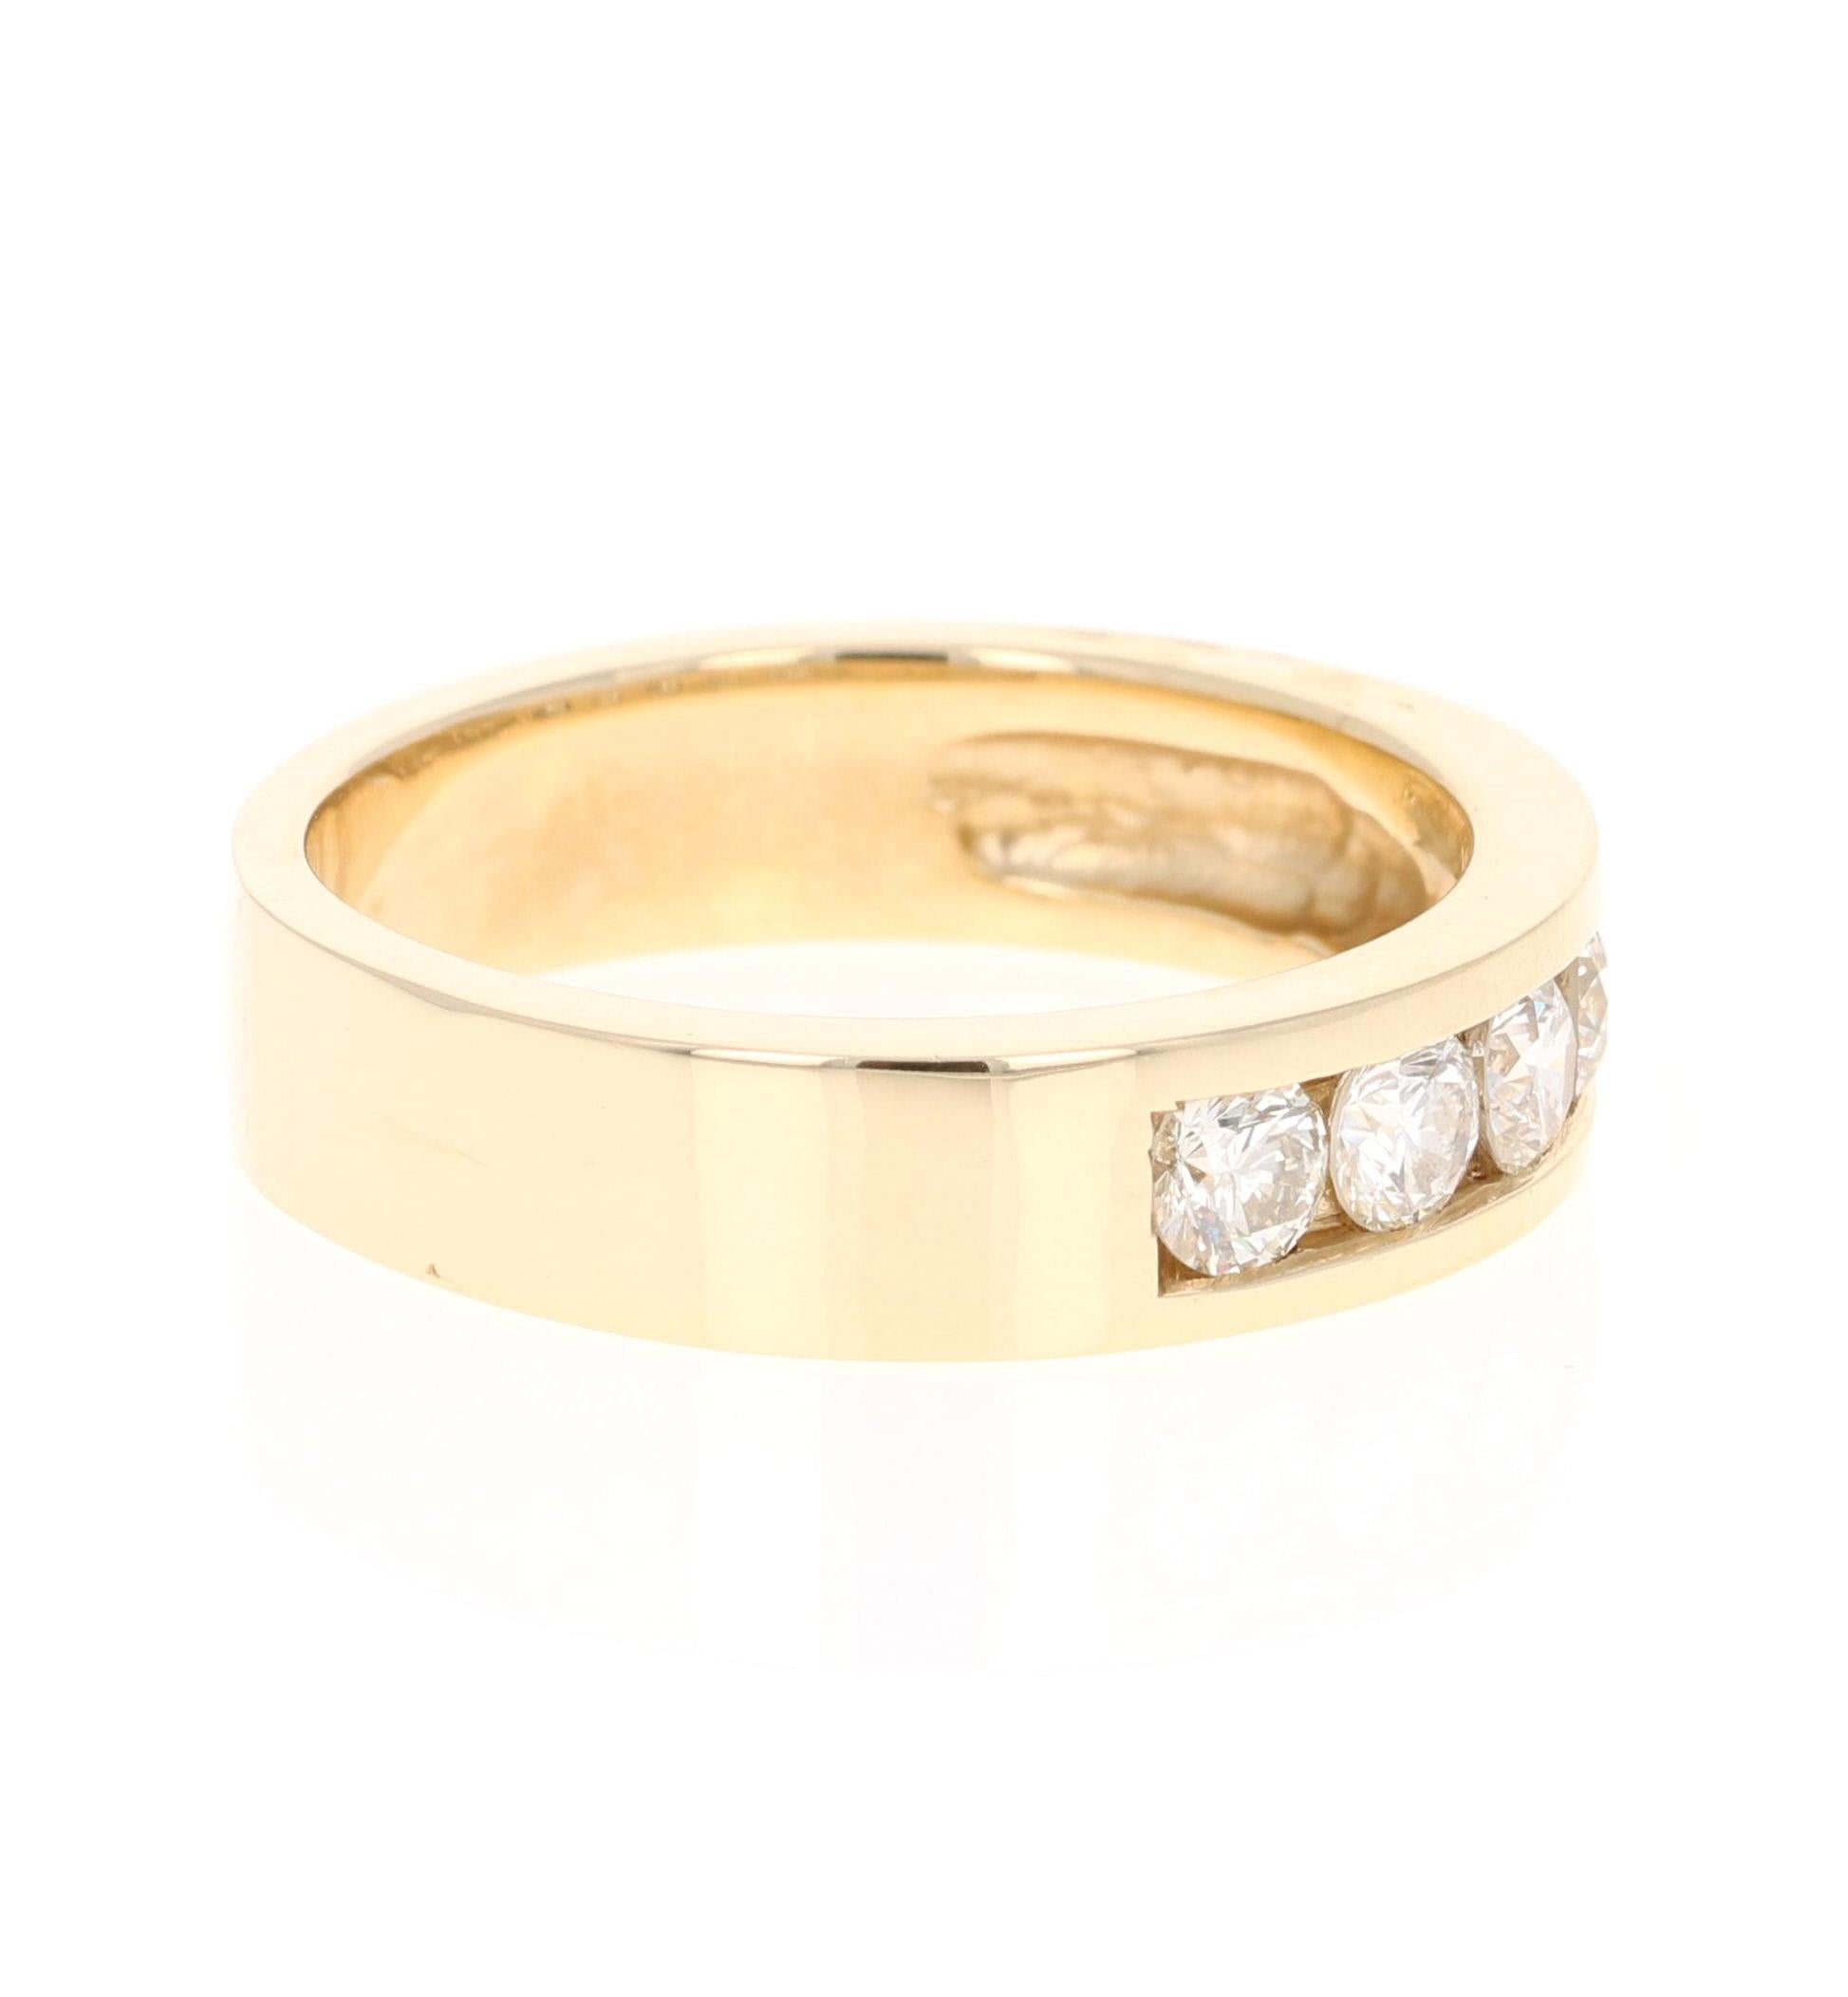 We have a Men's Collection of Fine Jewelry! Beautiful, Bold, Masculine and Simple Men's Wedding Rings/Bands. 

This Men's Band has 5 Round Cut Diamonds that weigh 0.95 Carats. It is crafted in 14 Karat Yellow Gold and weighs approximately 7.3 grams.